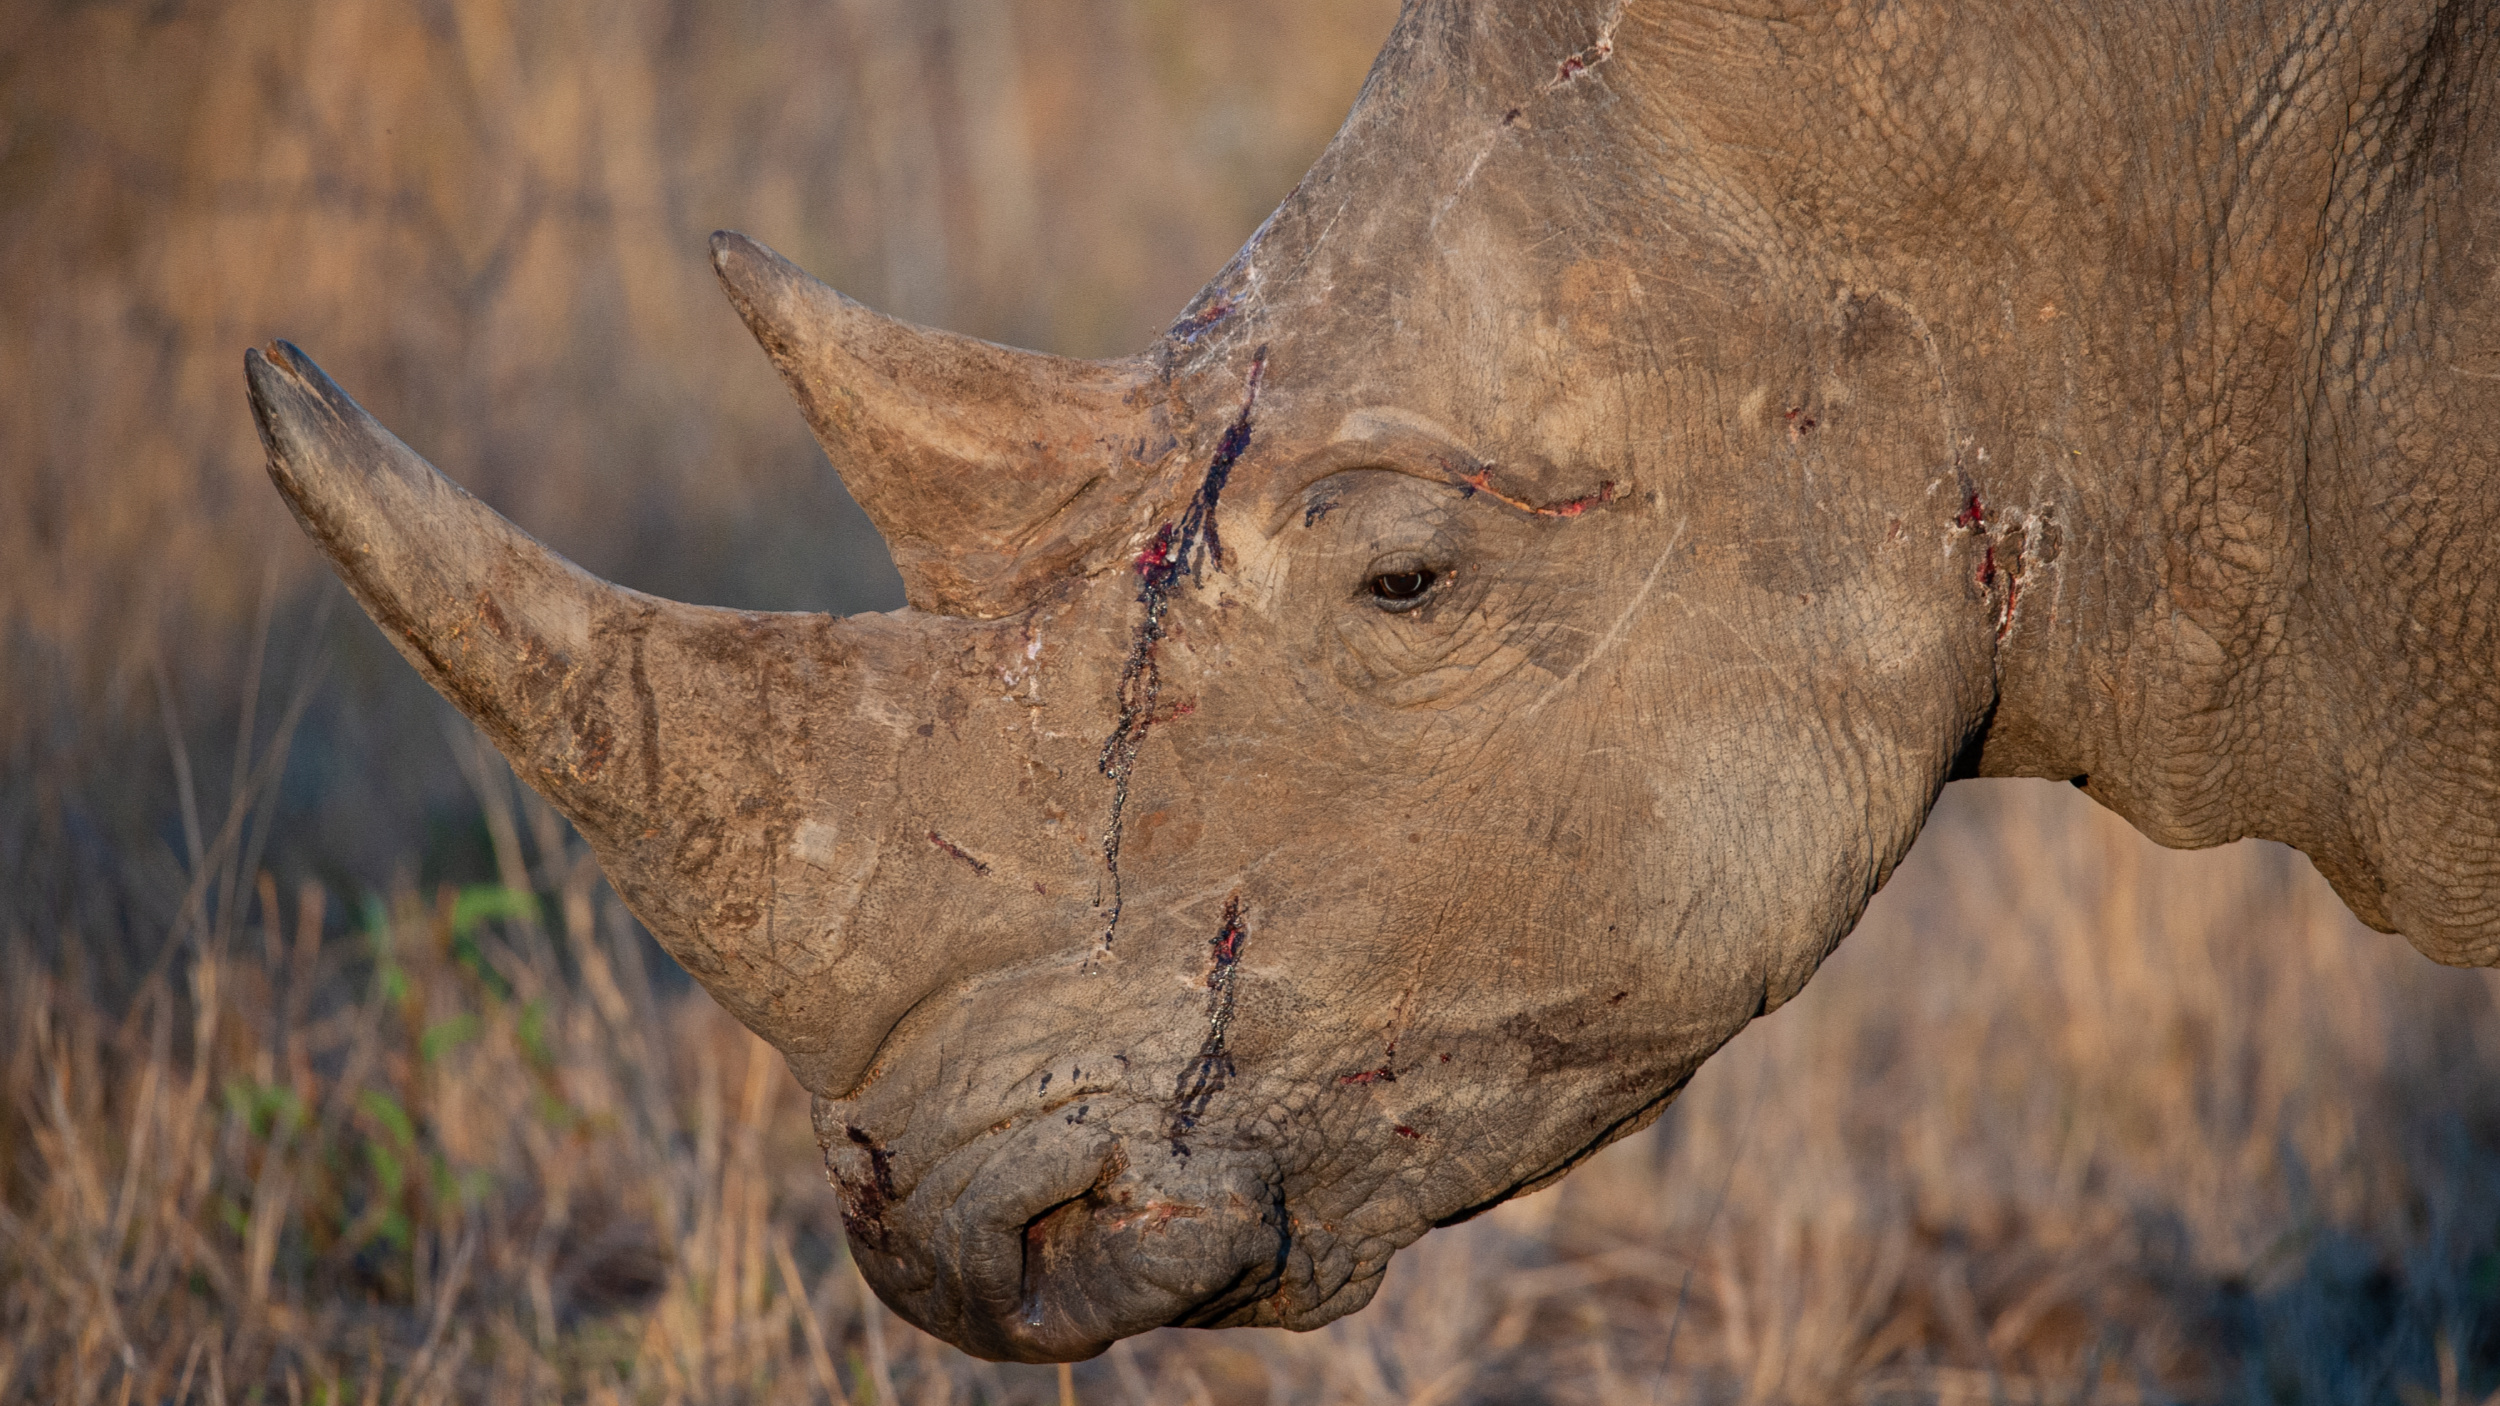 Farmed Rhino Horn Not Seen As Substitute Product - Nature Needs More